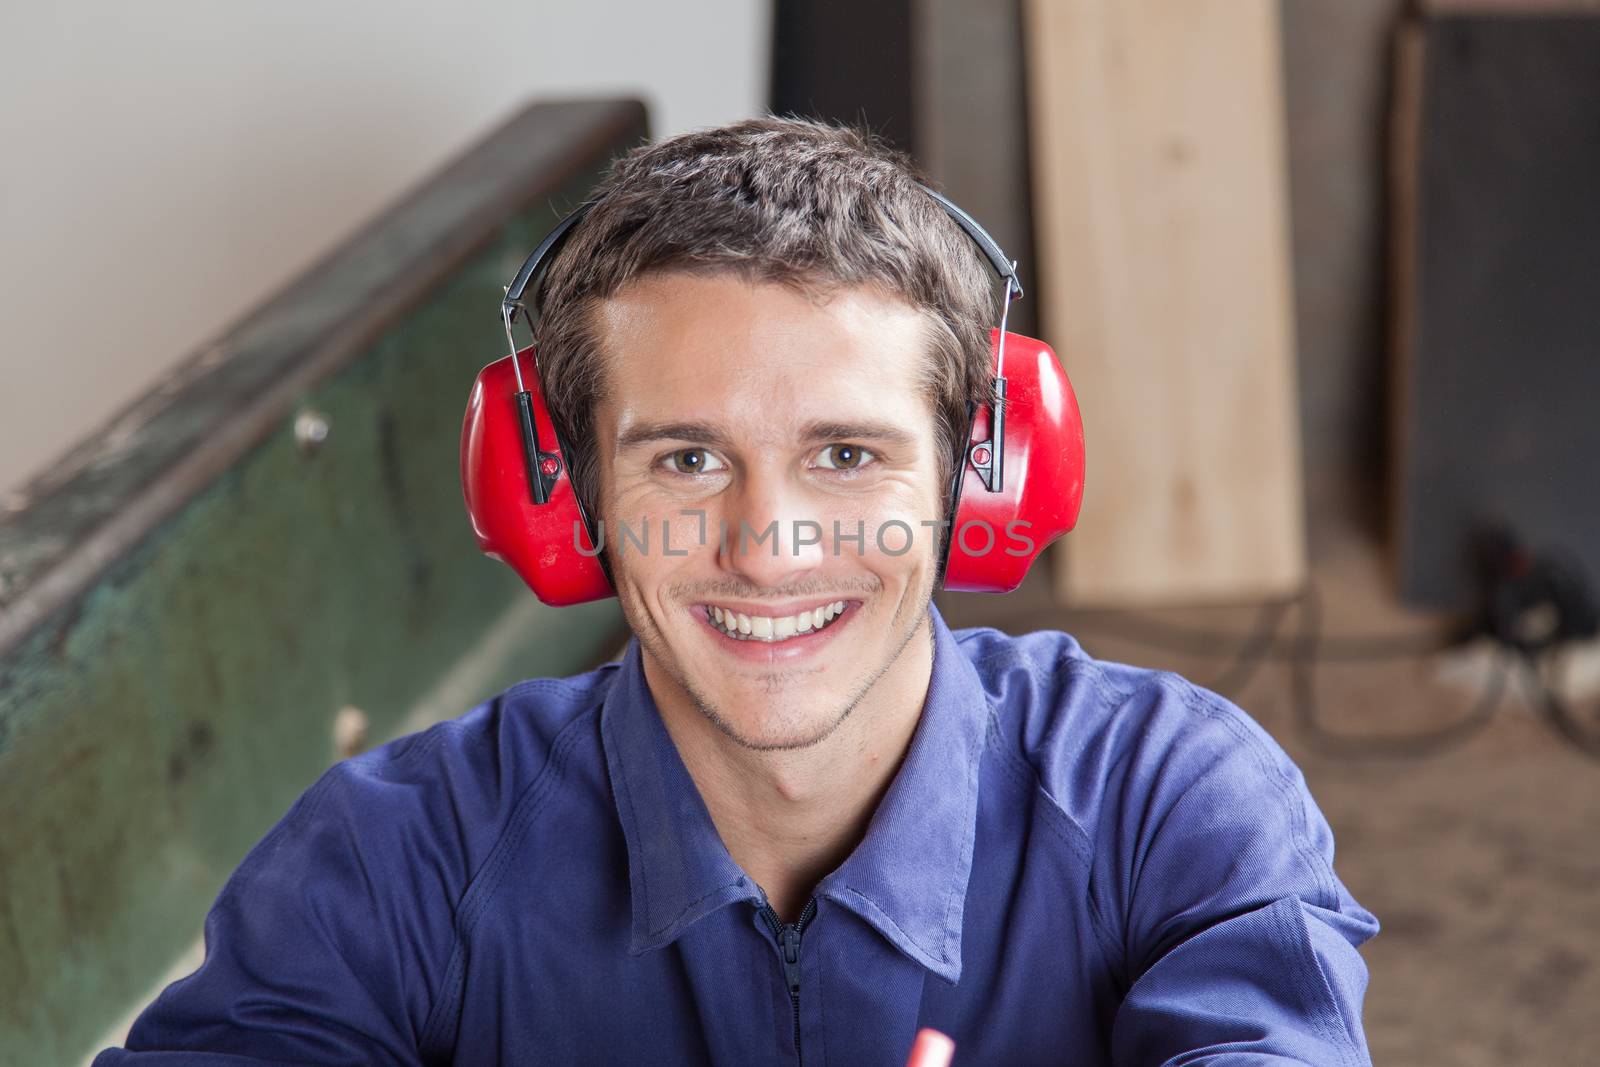 Smiling carpenter with headphones by ifilms